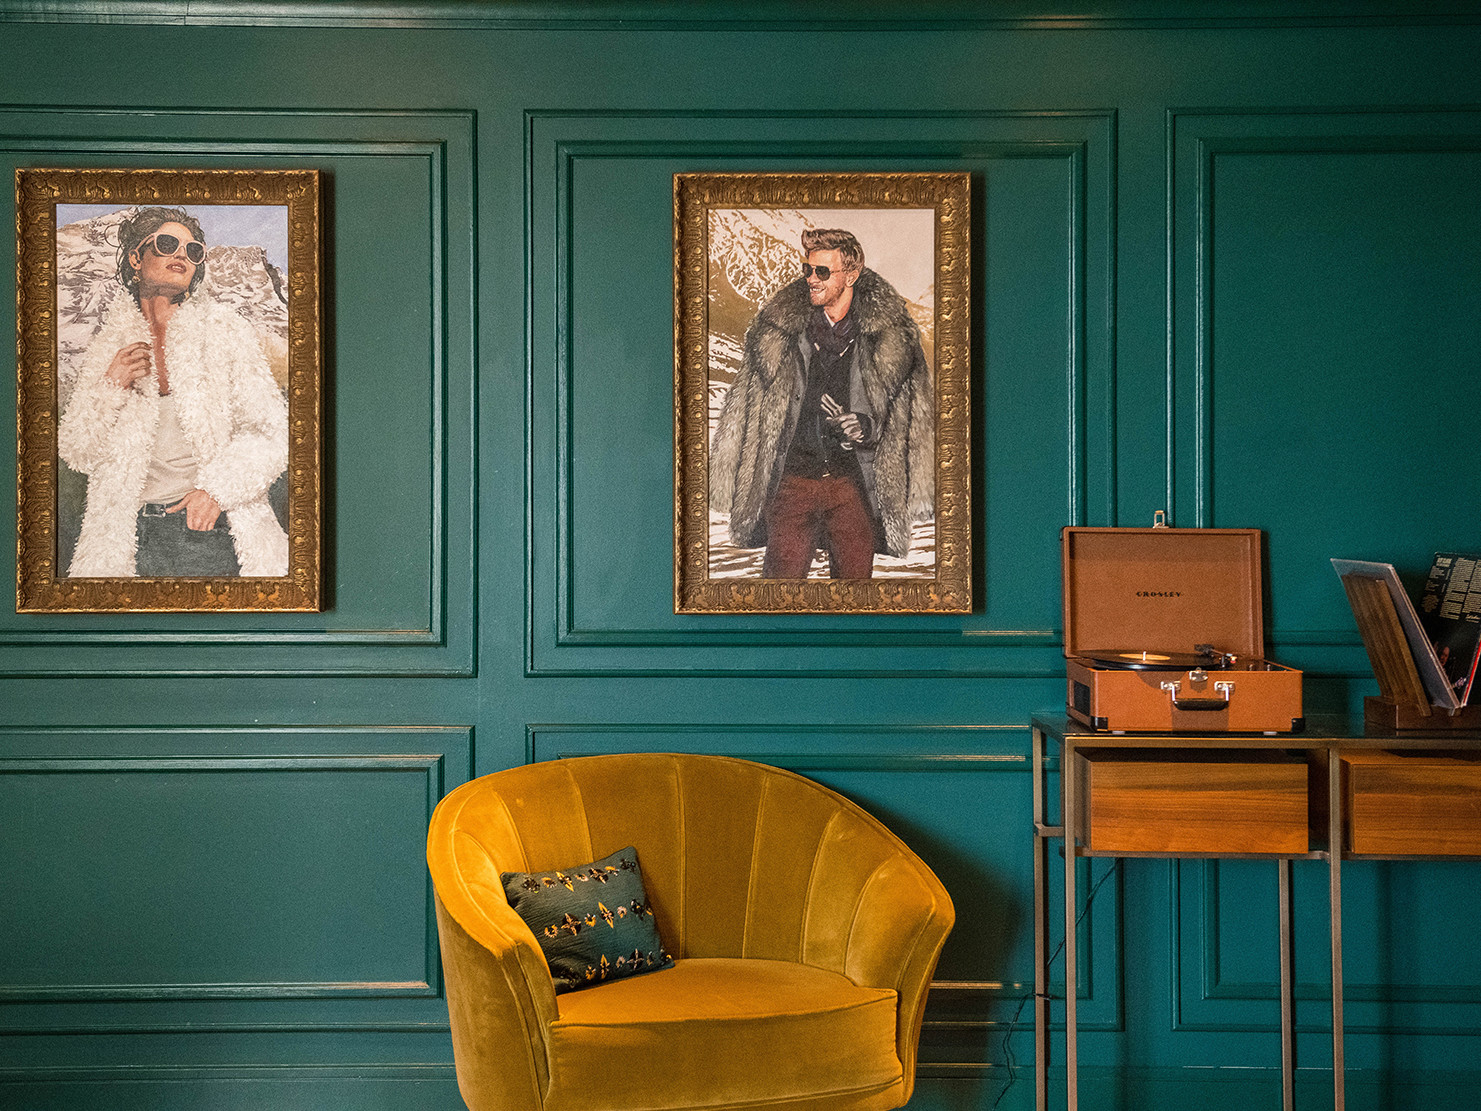 deep green walls with molding and gold filigree portrait frames. gold velvet lounge chair and wood table with vinyl records